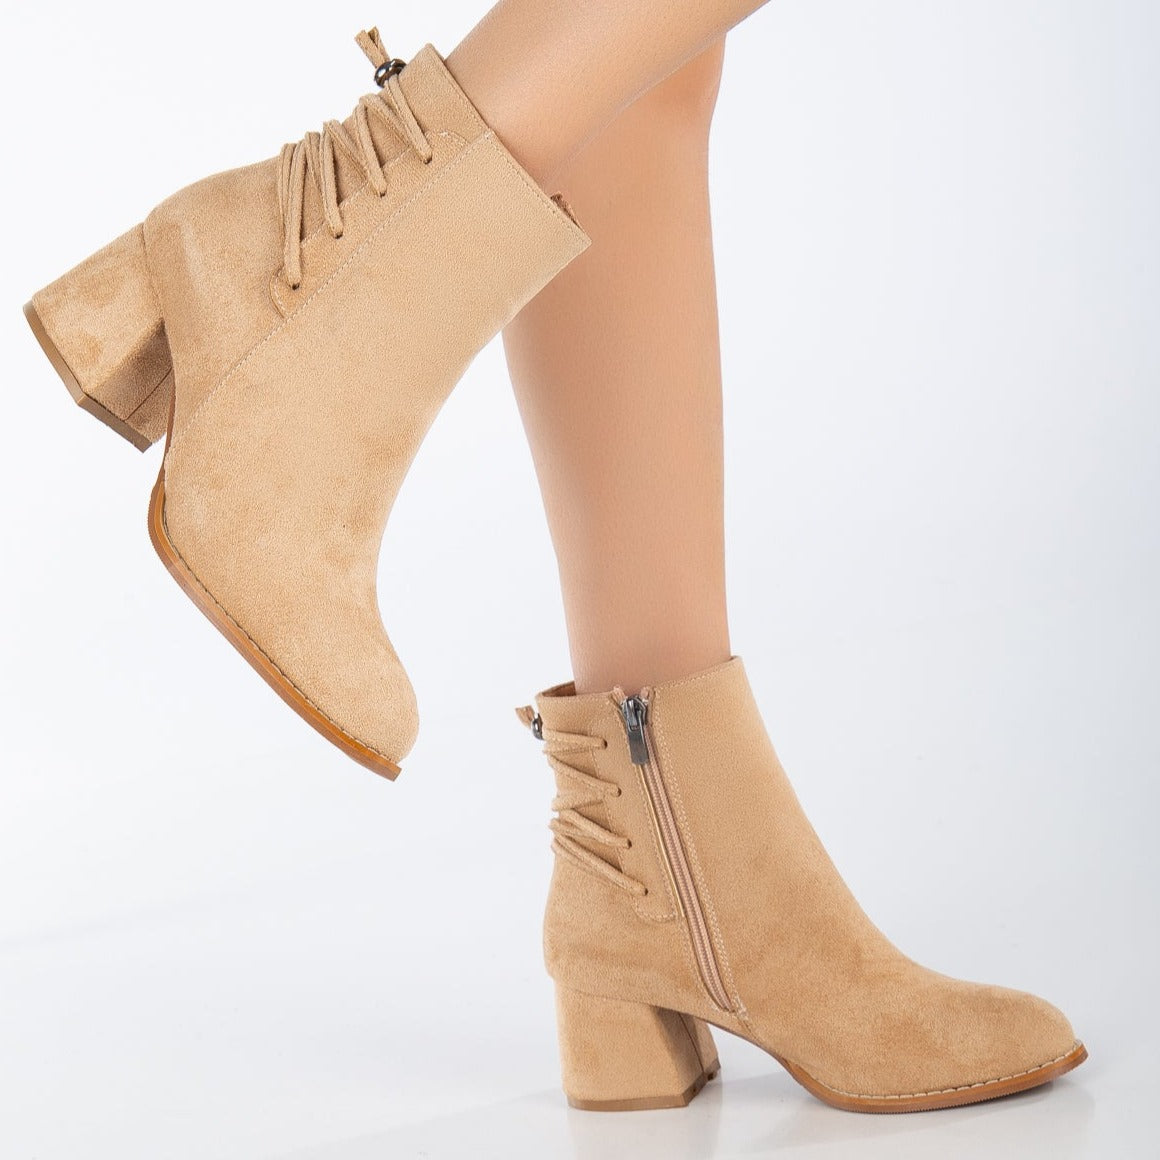 Lucie - Yellow Mustard Suede Ankle Boots